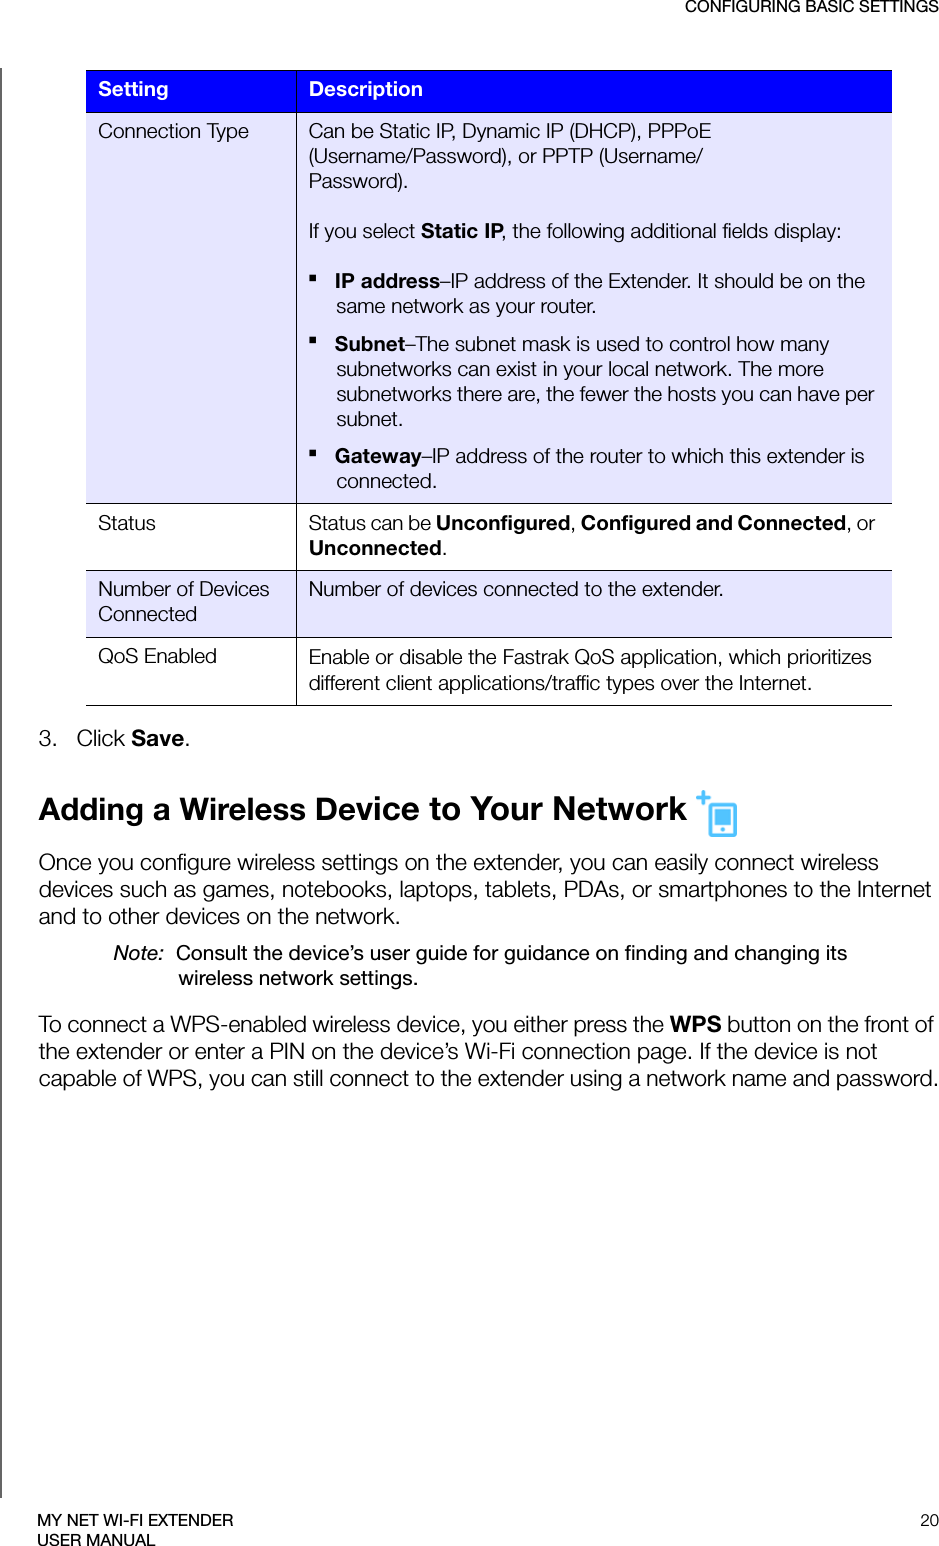 CONFIGURING BASIC SETTINGS20MY NET WI-FI EXTENDERUSER MANUAL3.   Click Save.Adding a Wireless Device to Your Network Once you configure wireless settings on the extender, you can easily connect wireless devices such as games, notebooks, laptops, tablets, PDAs, or smartphones to the Internet and to other devices on the network. Note:  Consult the device’s user guide for guidance on finding and changing its wireless network settings.To connect a WPS-enabled wireless device, you either press the WPS button on the front of the extender or enter a PIN on the device’s Wi-Fi connection page. If the device is not capable of WPS, you can still connect to the extender using a network name and password.Connection Type Can be Static IP, Dynamic IP (DHCP), PPPoE(Username/Password), or PPTP (Username/Password). If you select Static IP, the following additional fields display:IP address–IP address of the Extender. It should be on the same network as your router.Subnet–The subnet mask is used to control how many subnetworks can exist in your local network. The more subnetworks there are, the fewer the hosts you can have per subnet.Gateway–IP address of the router to which this extender is connected.Status Status can be Unconfigured, Configured and Connected, or Unconnected.Number of Devices ConnectedNumber of devices connected to the extender. QoS Enabled Enable or disable the Fastrak QoS application, which prioritizes different client applications/traffic types over the Internet.Setting Description